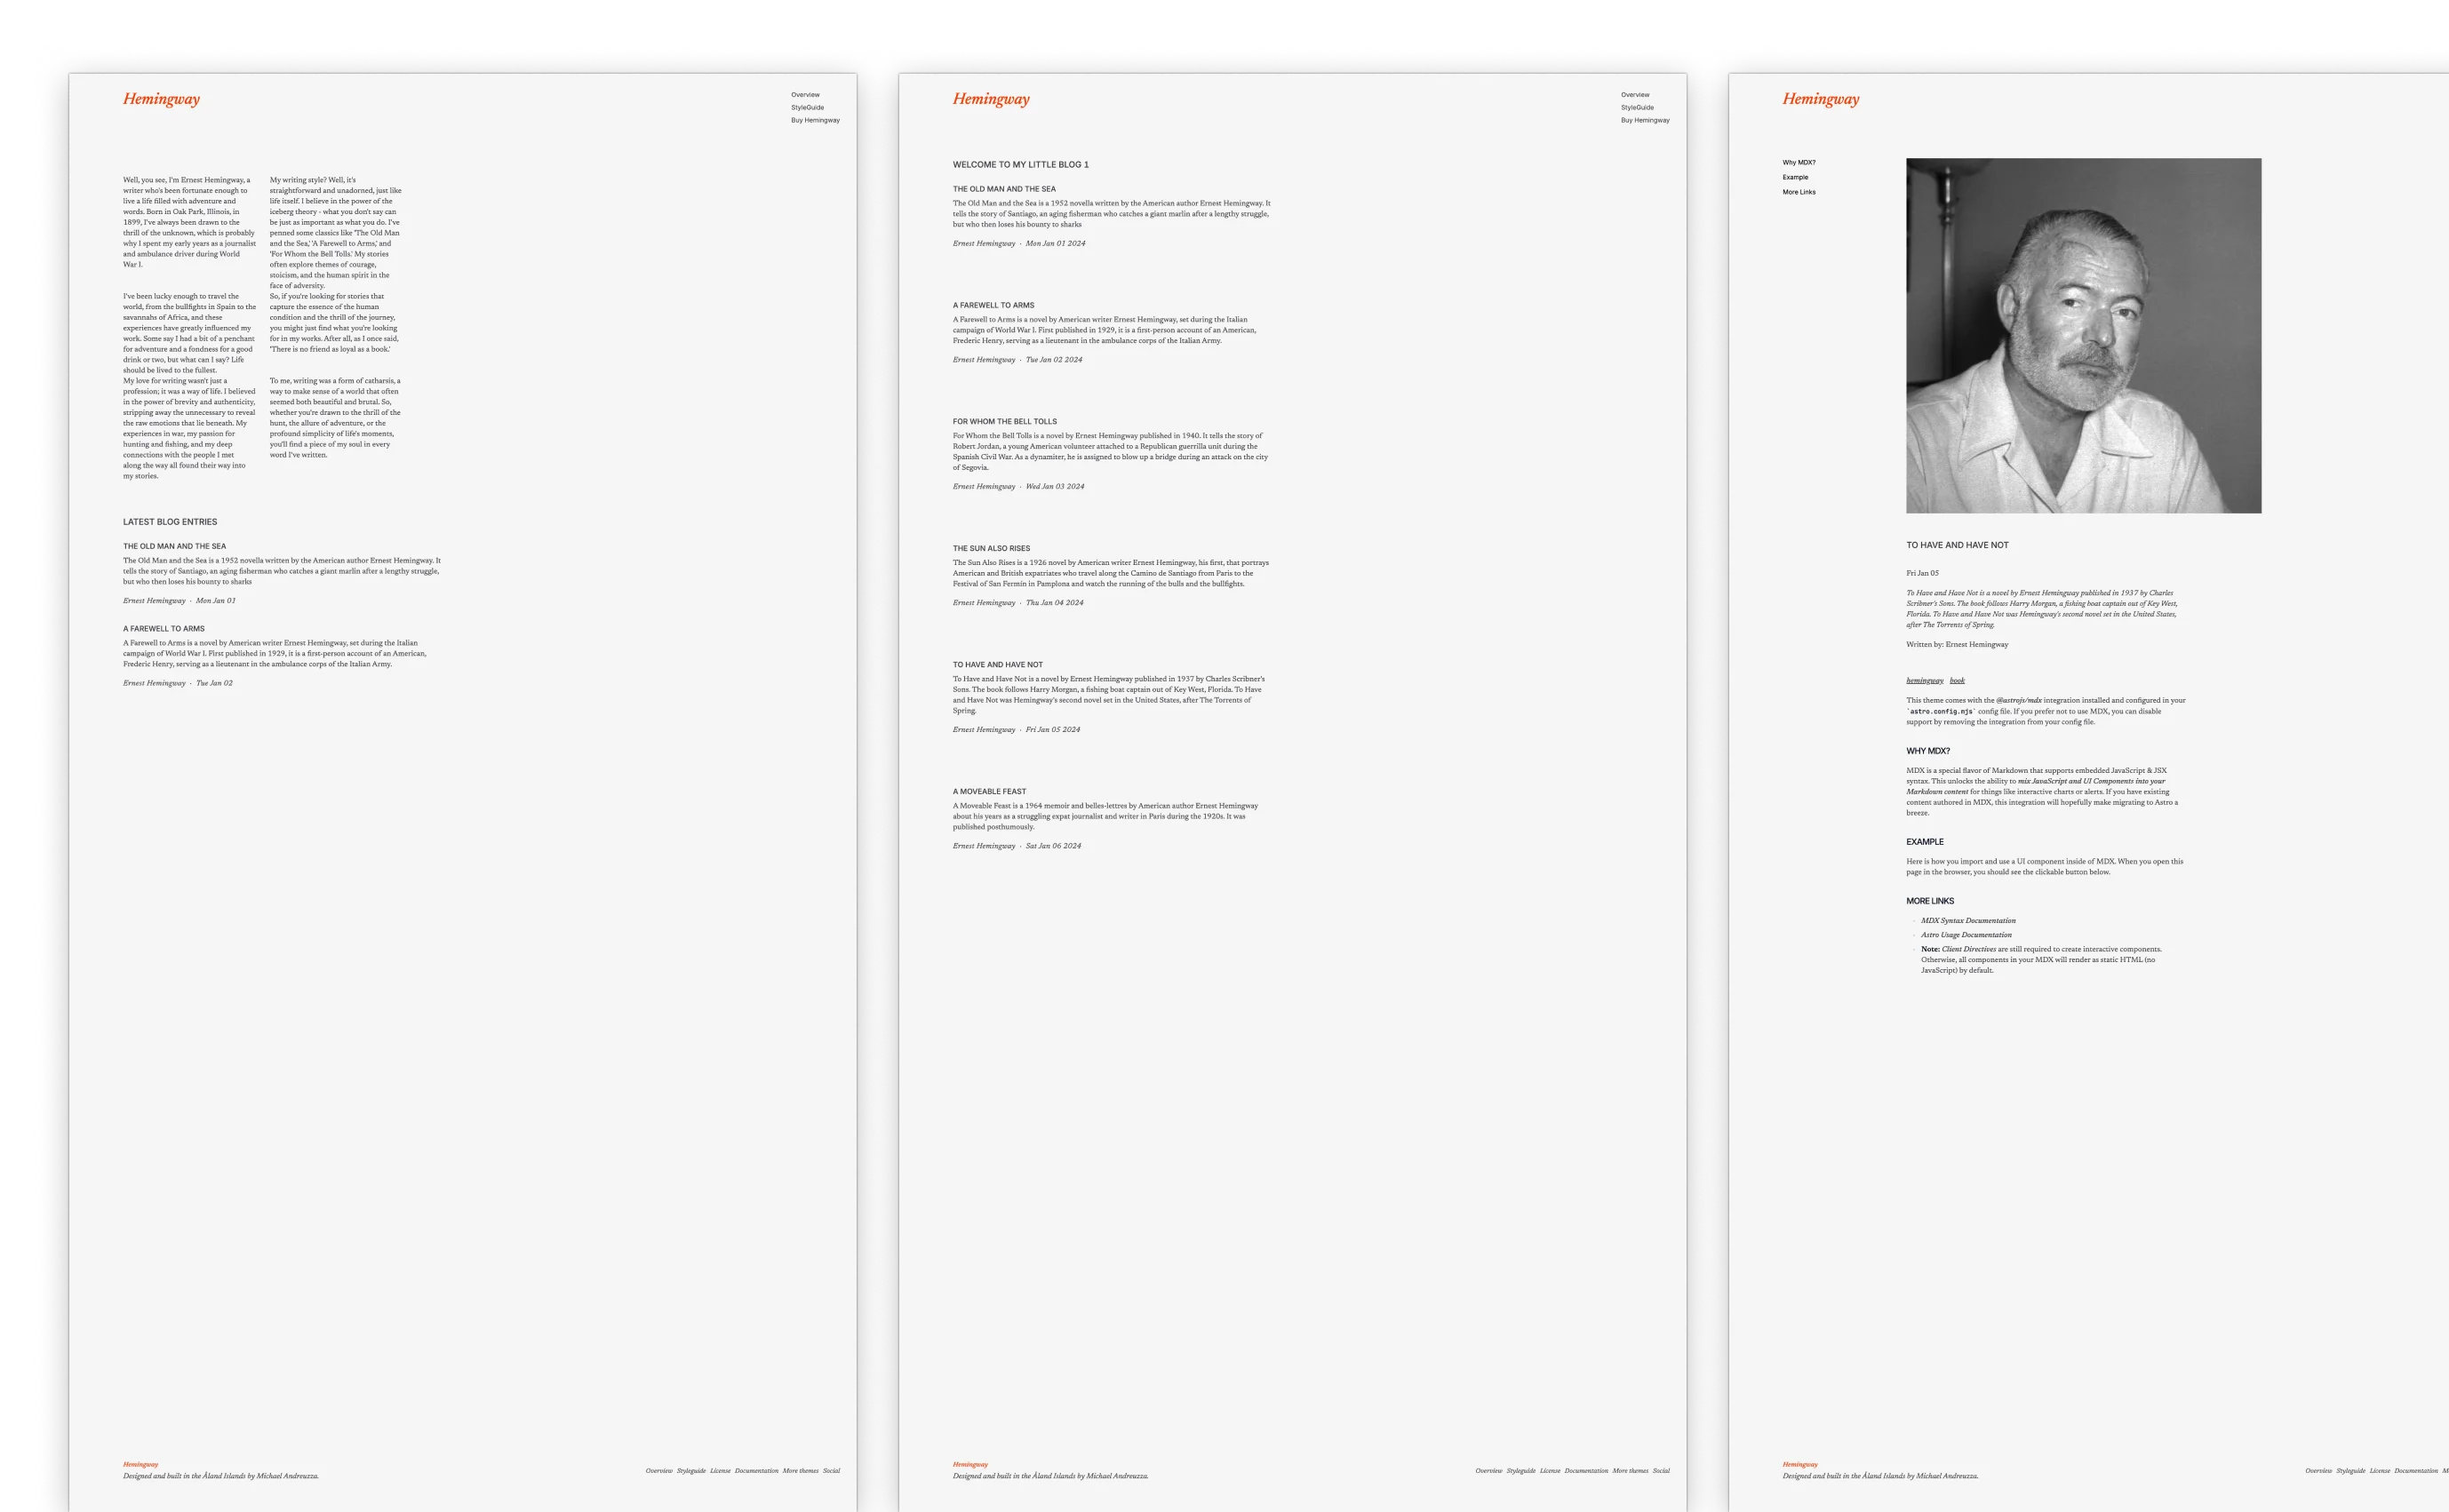 A literary blog theme featuring works by Ernest Hemingway, with a clean, minimalist design. The main page lists classic titles like 'The Old Man and the Sea' and 'A Farewell to Arms,' each with a brief synopsis. On the sidebar, an image of Hemingway writing is accompanied by excerpts from his books and a personal quote about his writing style.